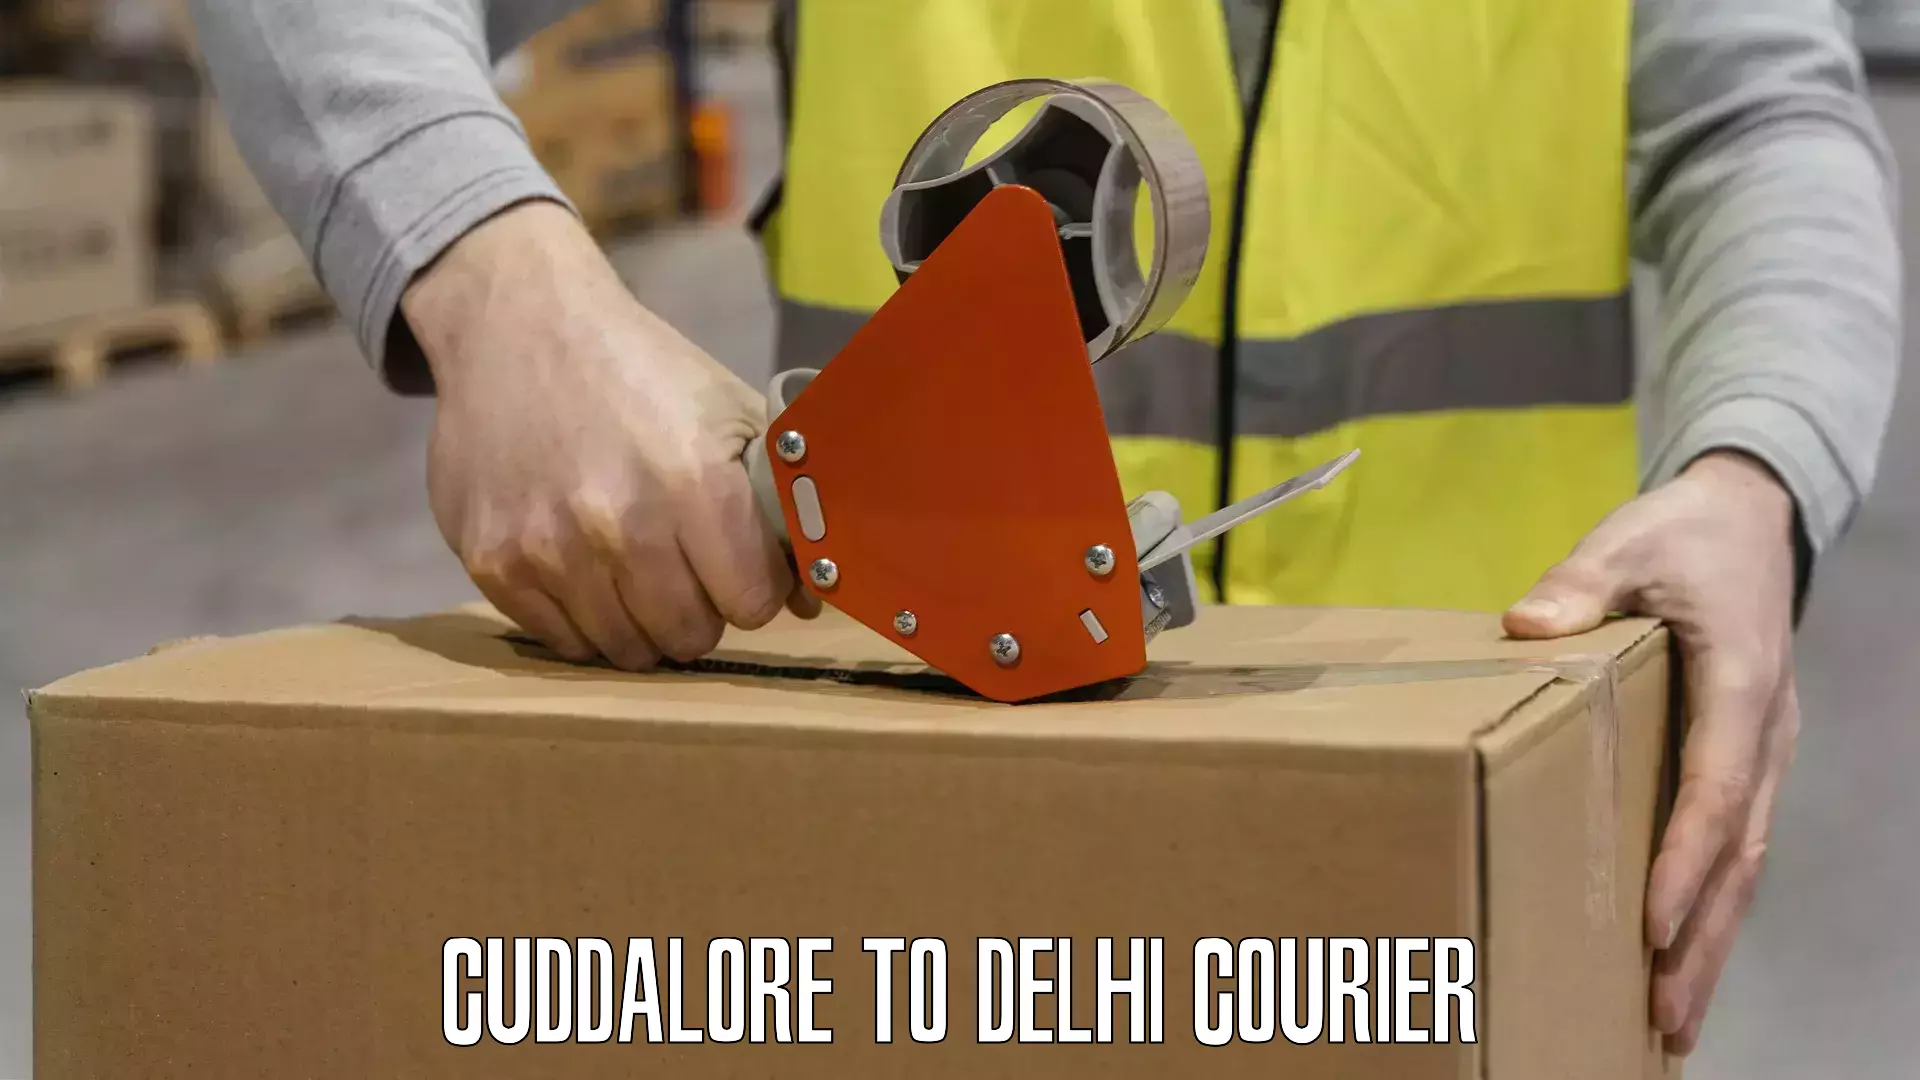 Full-service courier options Cuddalore to IIT Delhi